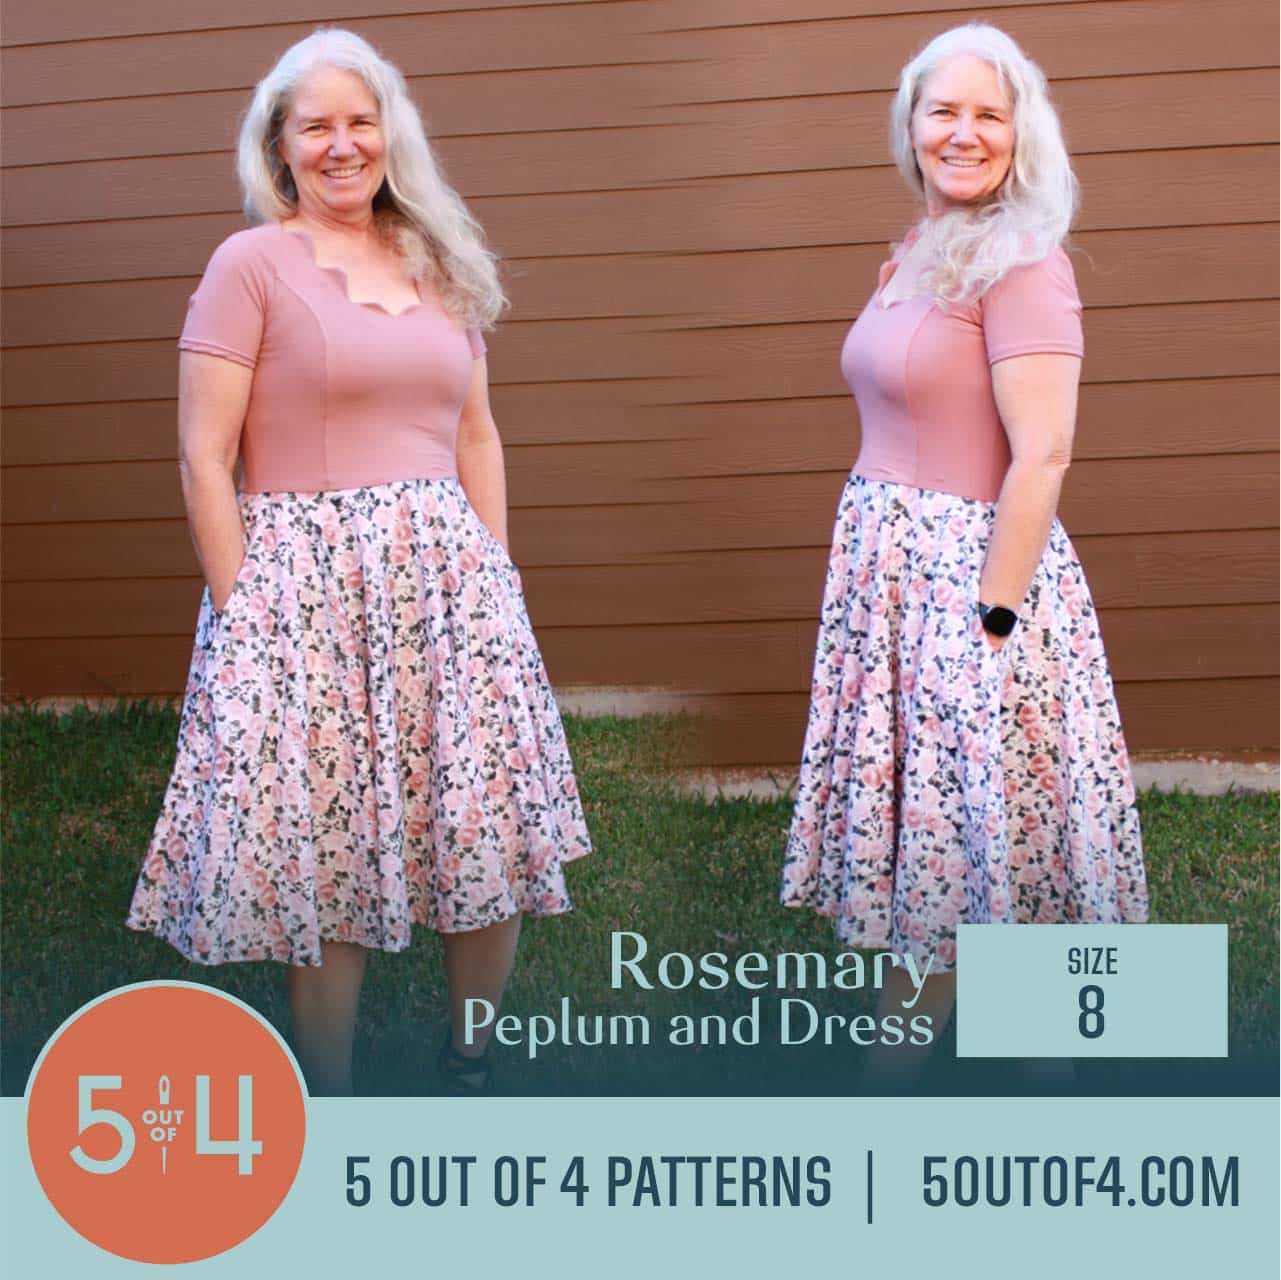 Rosemary Peplum and Dress - 5 out of 4 Patterns